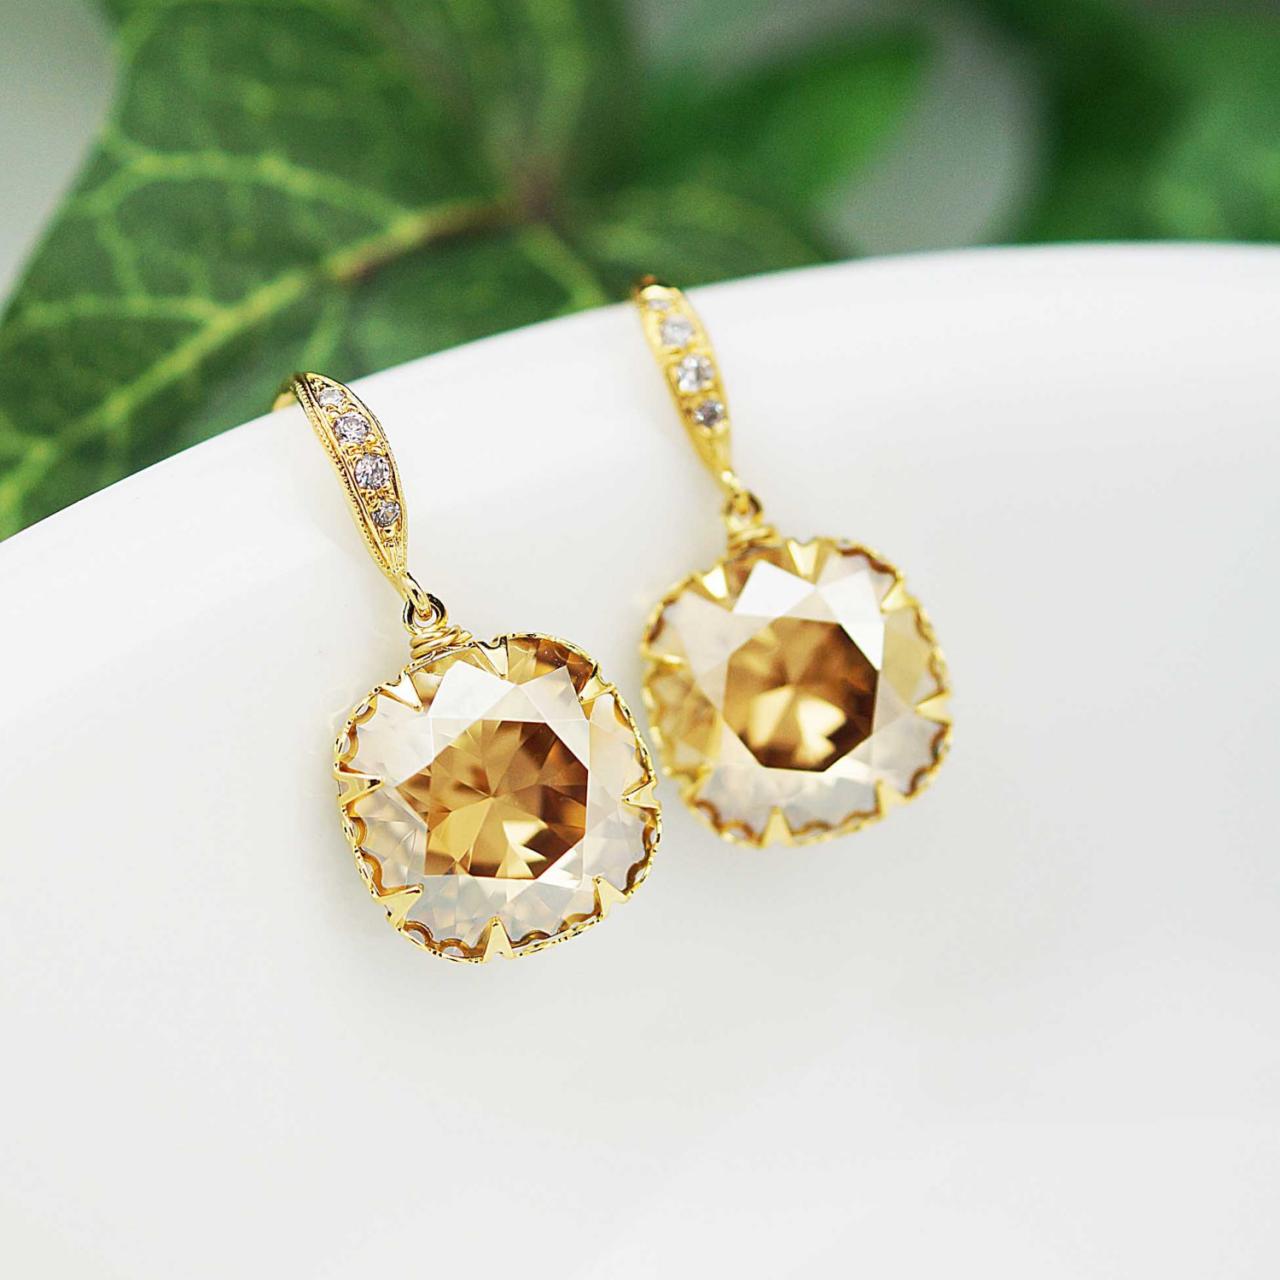 Bridal Earrings Bridesmaid Earrings Gold Plated Sterling Silver Ear Hooks And Golden Shadow Swarovski Crystal Square Drops